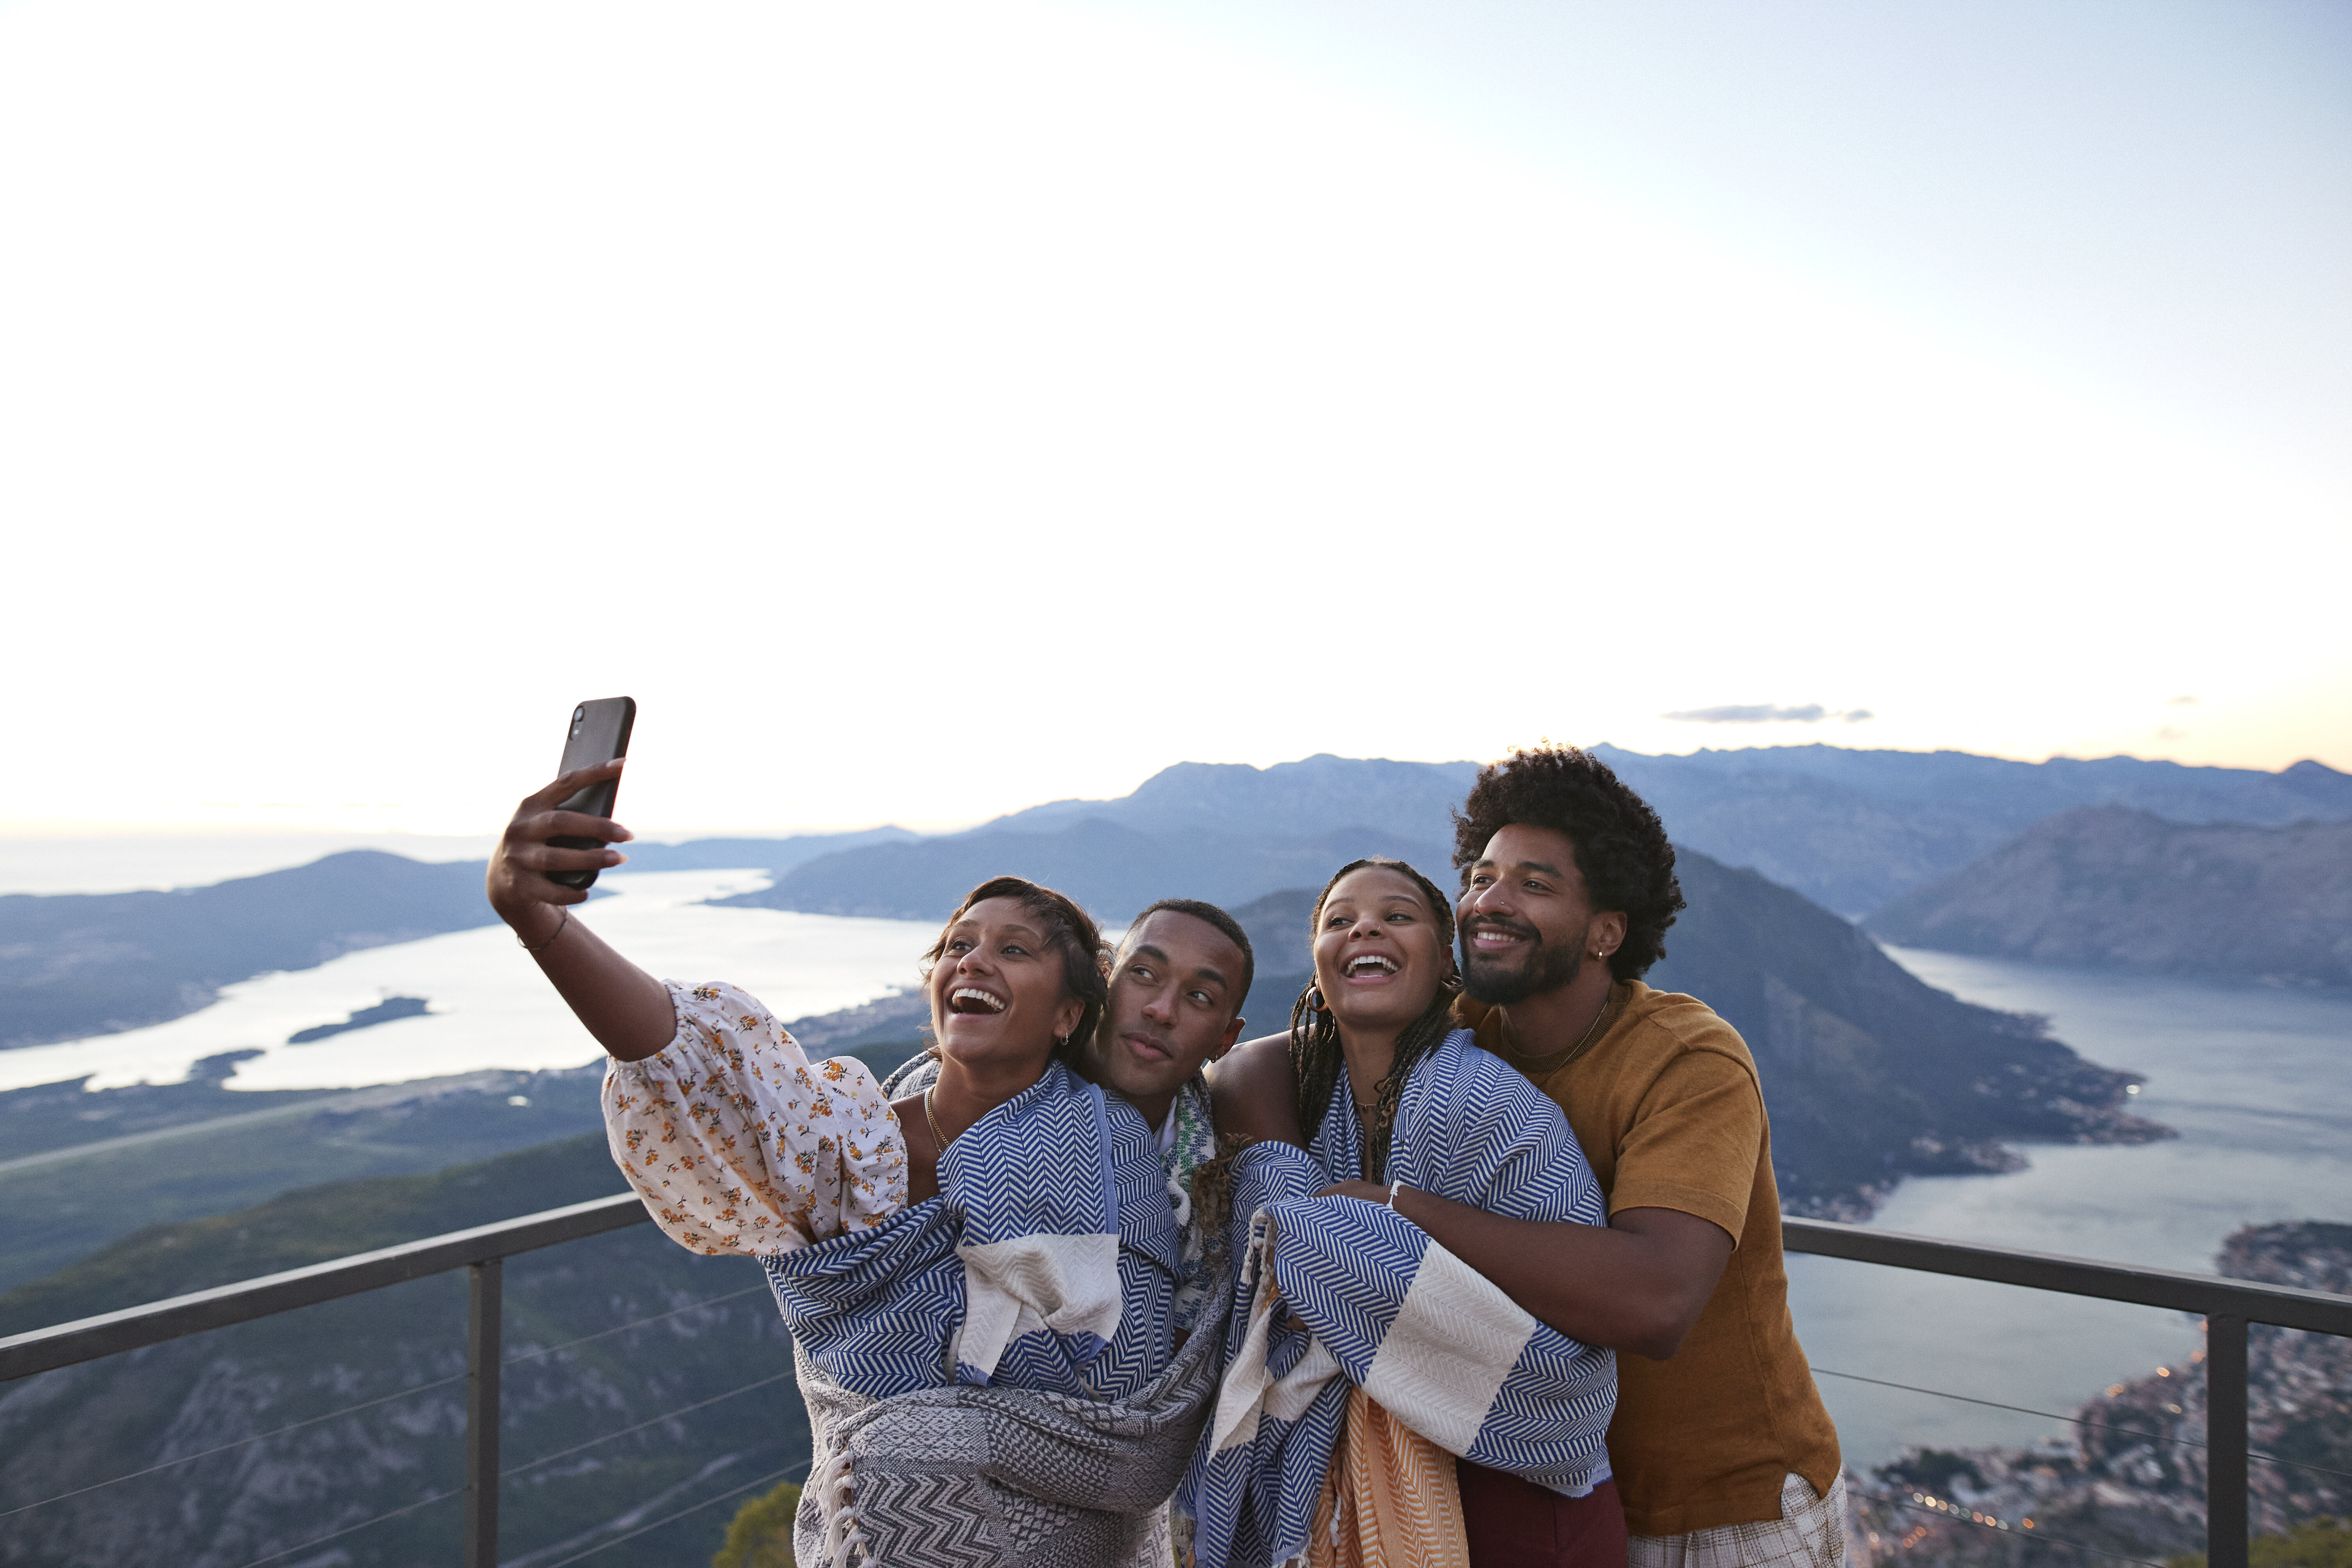 Four friends taking a selfie with a scenic mountainous backdrop during travel